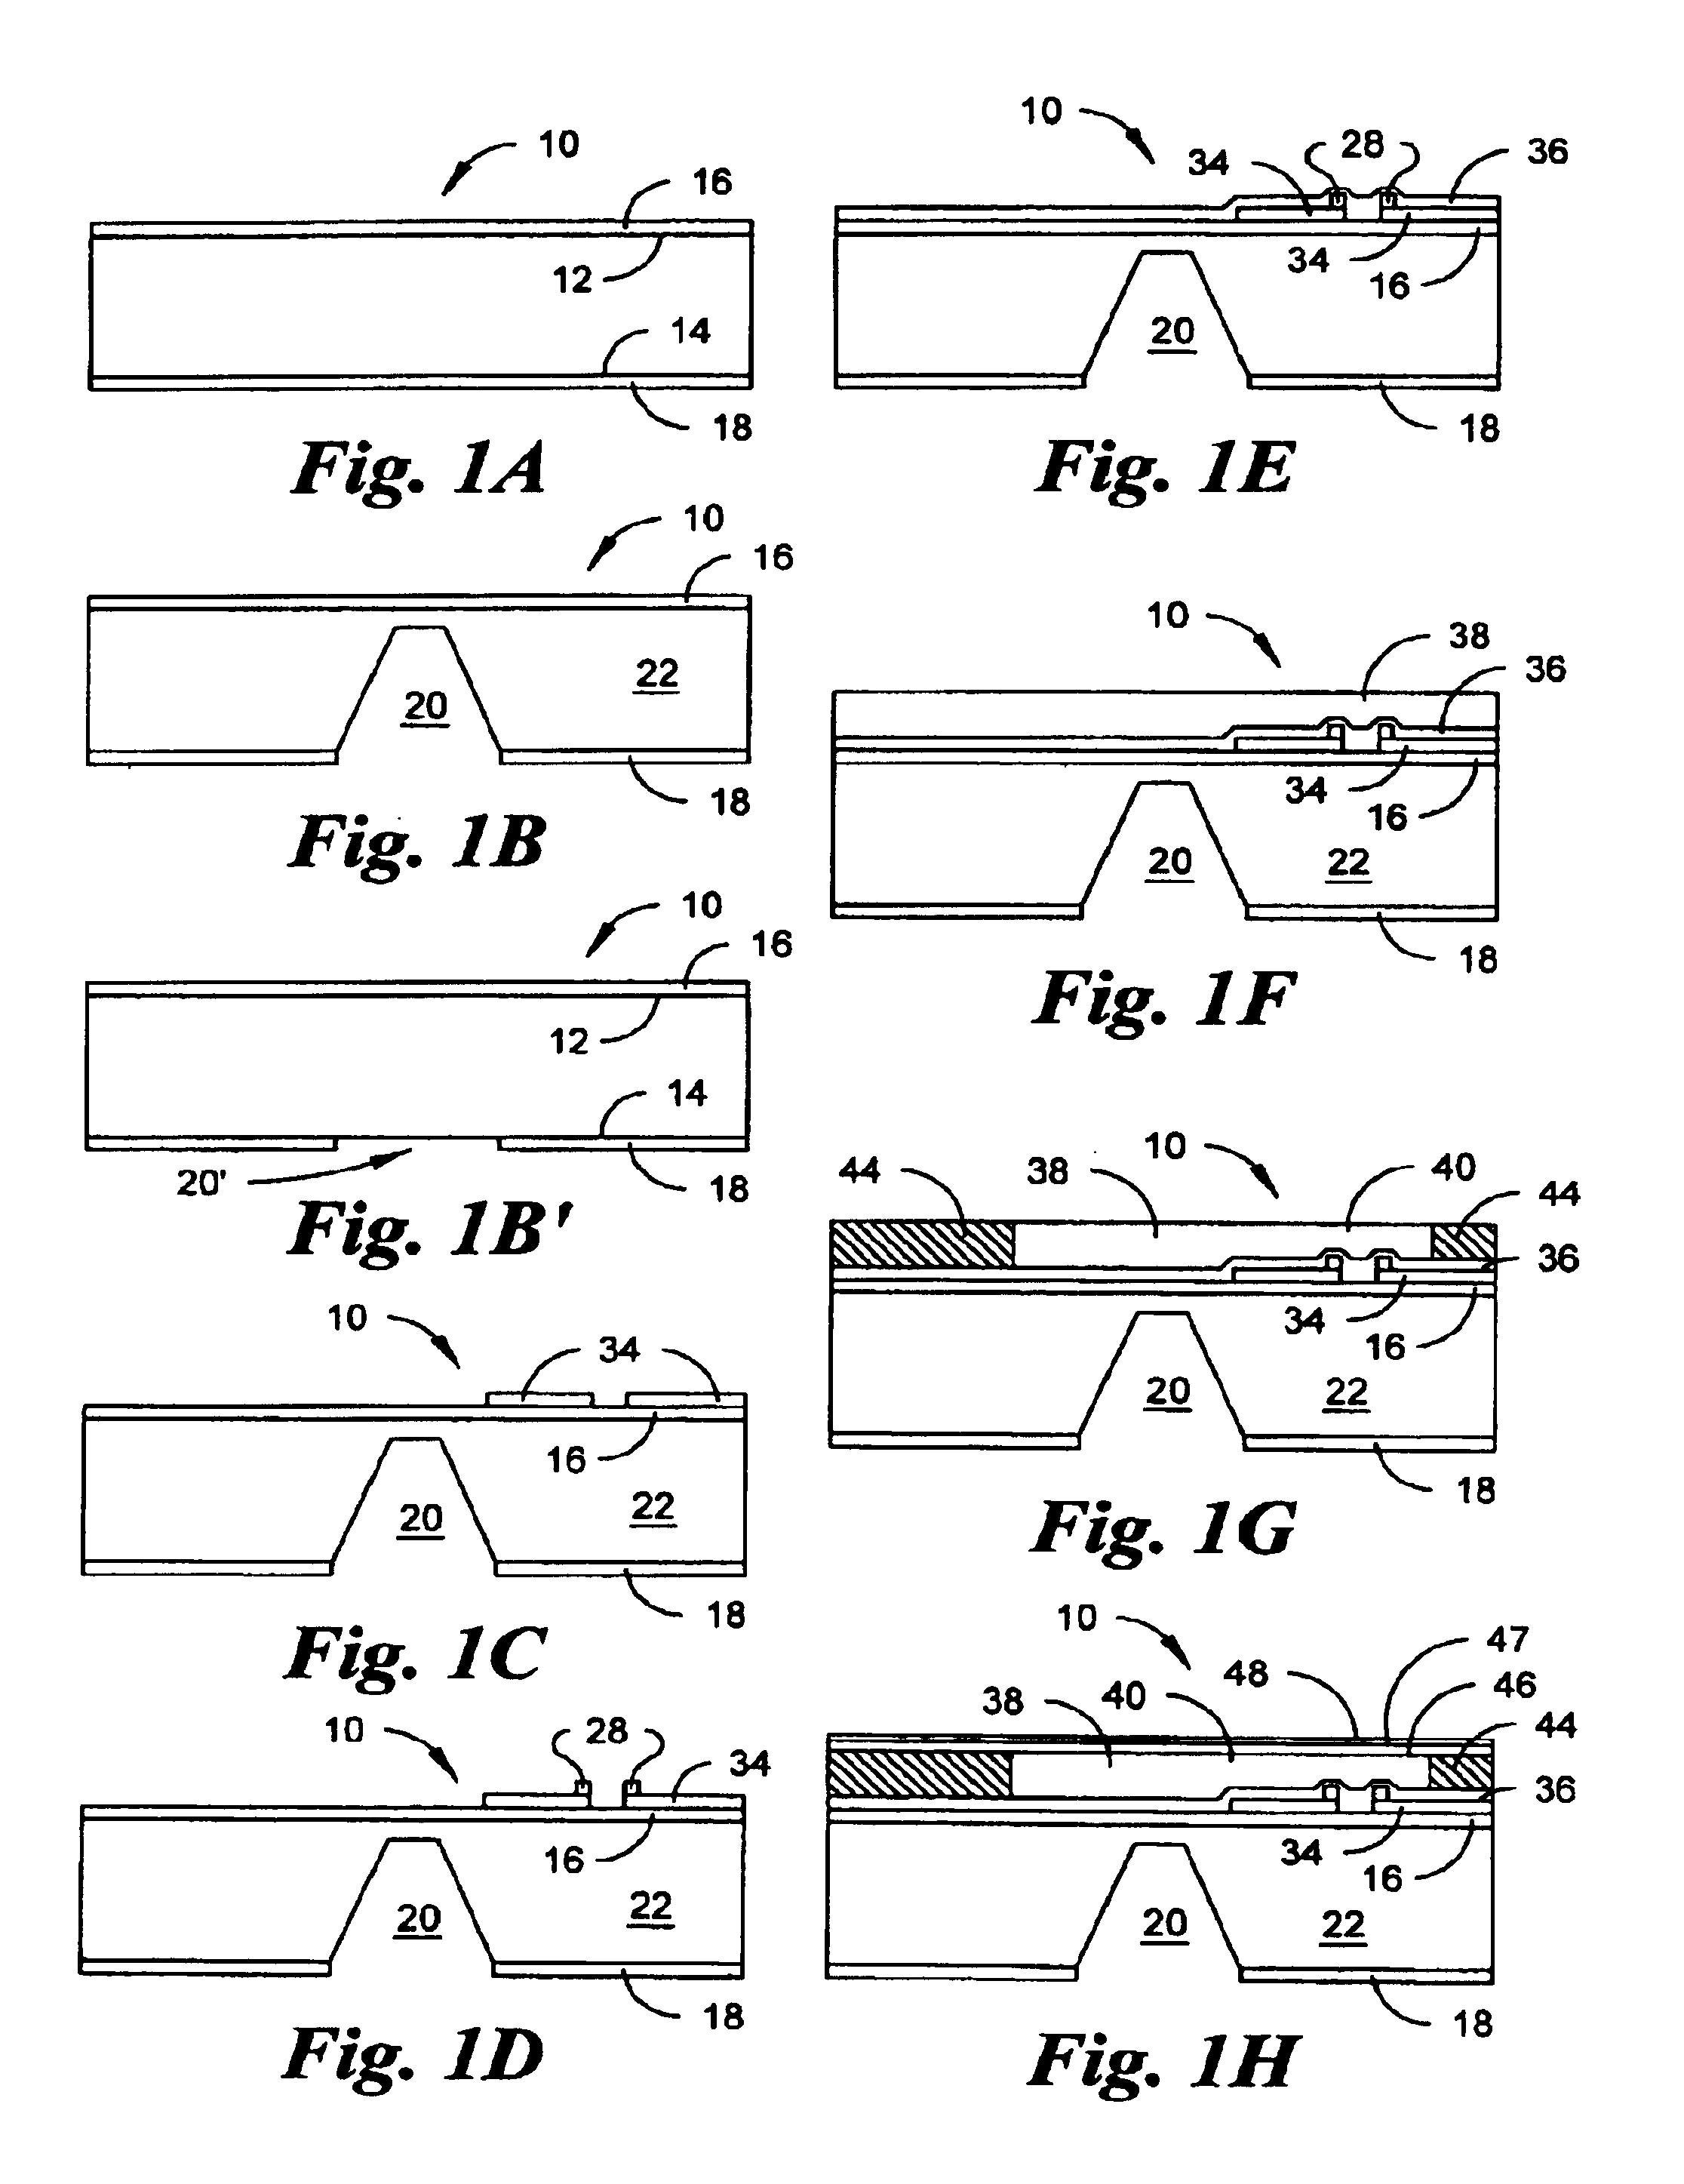 Method for fabricating an integrated nozzle plate and multi-level micro-fluidic devices fabricated